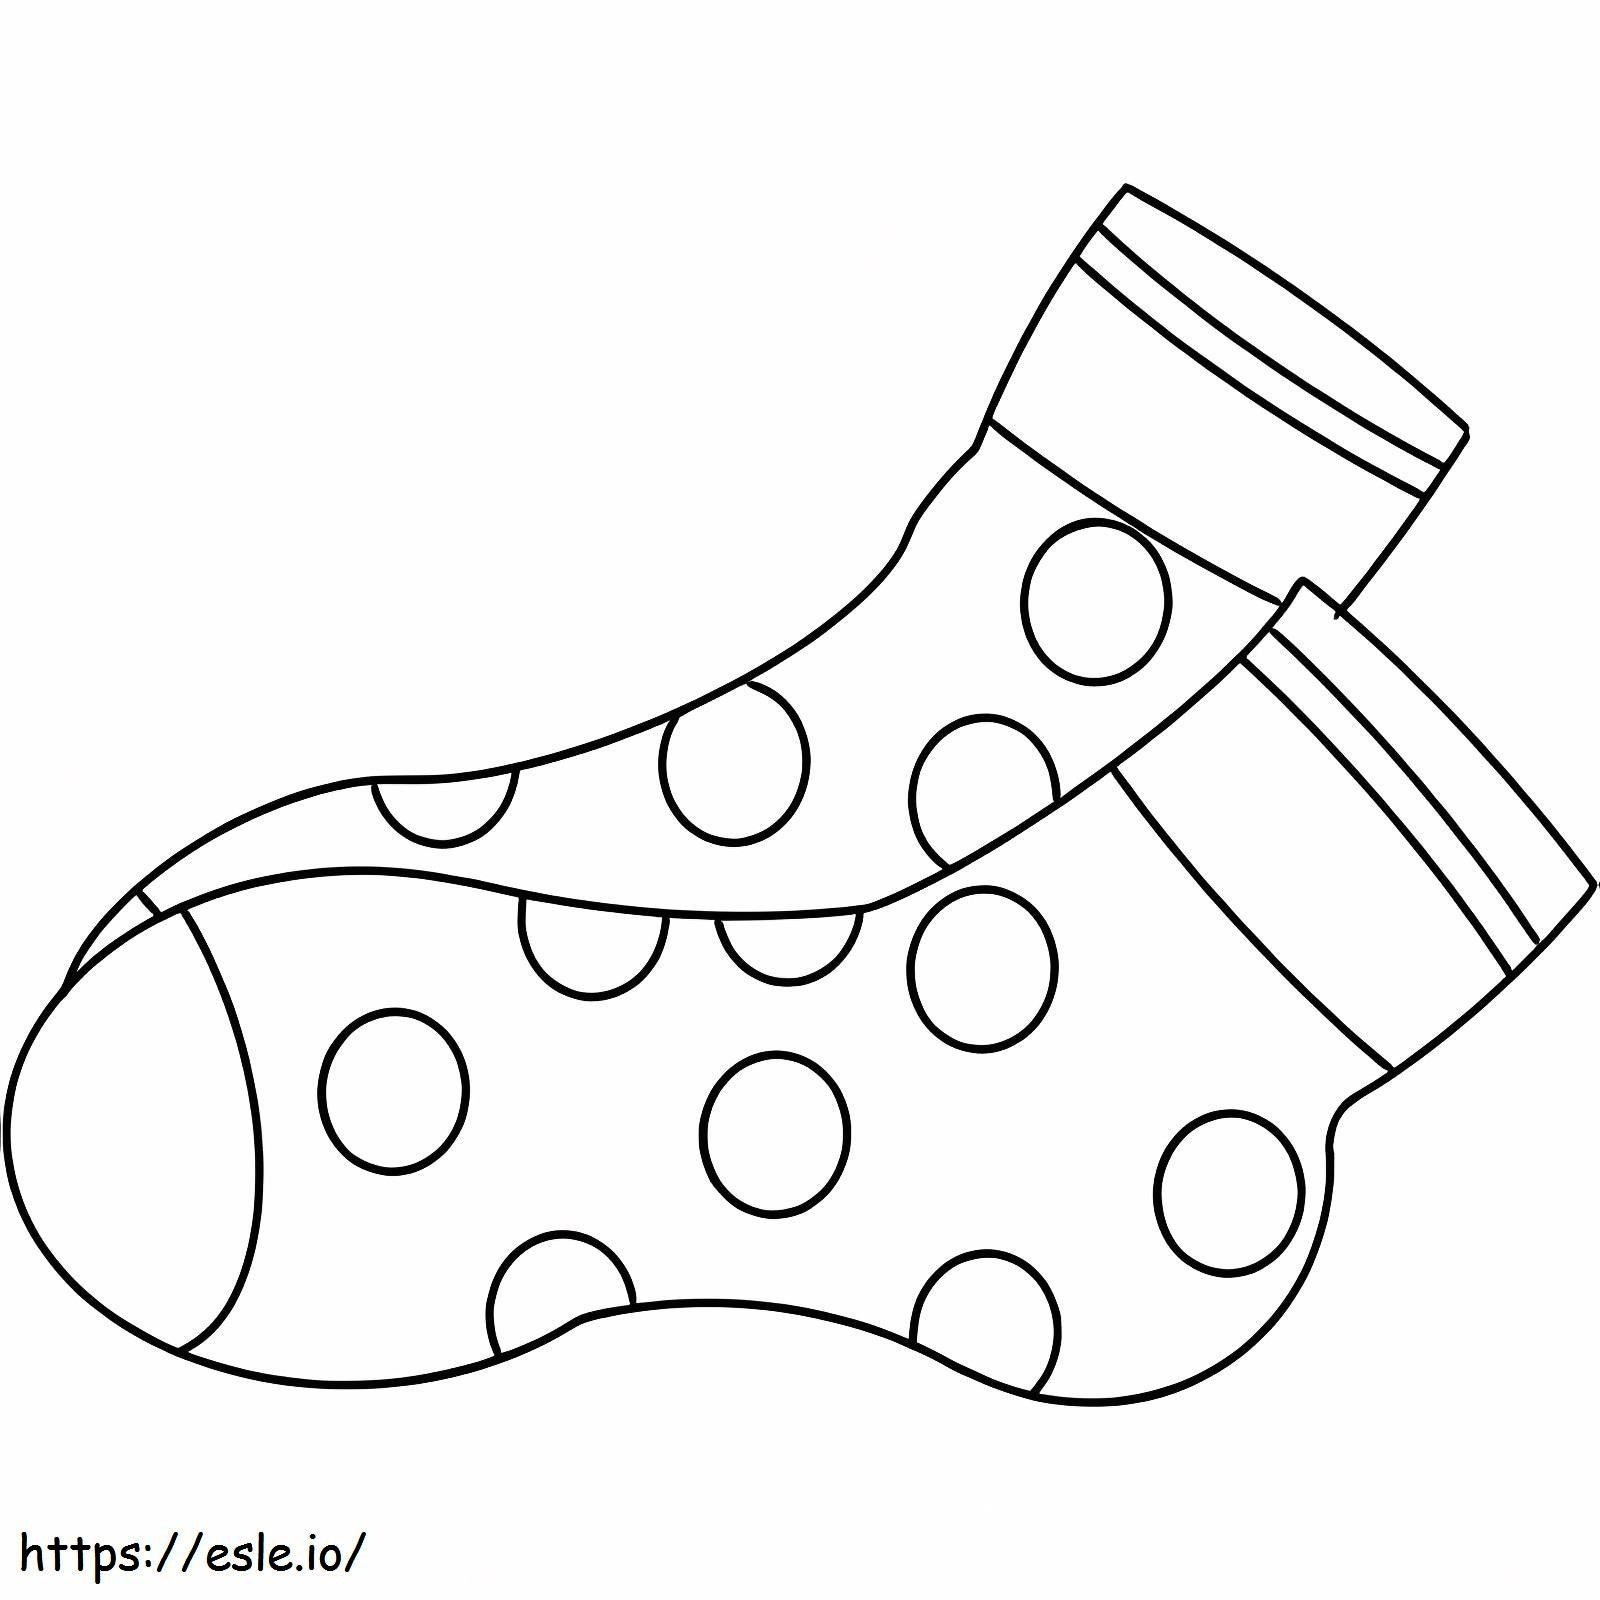 Cotton Socks coloring page